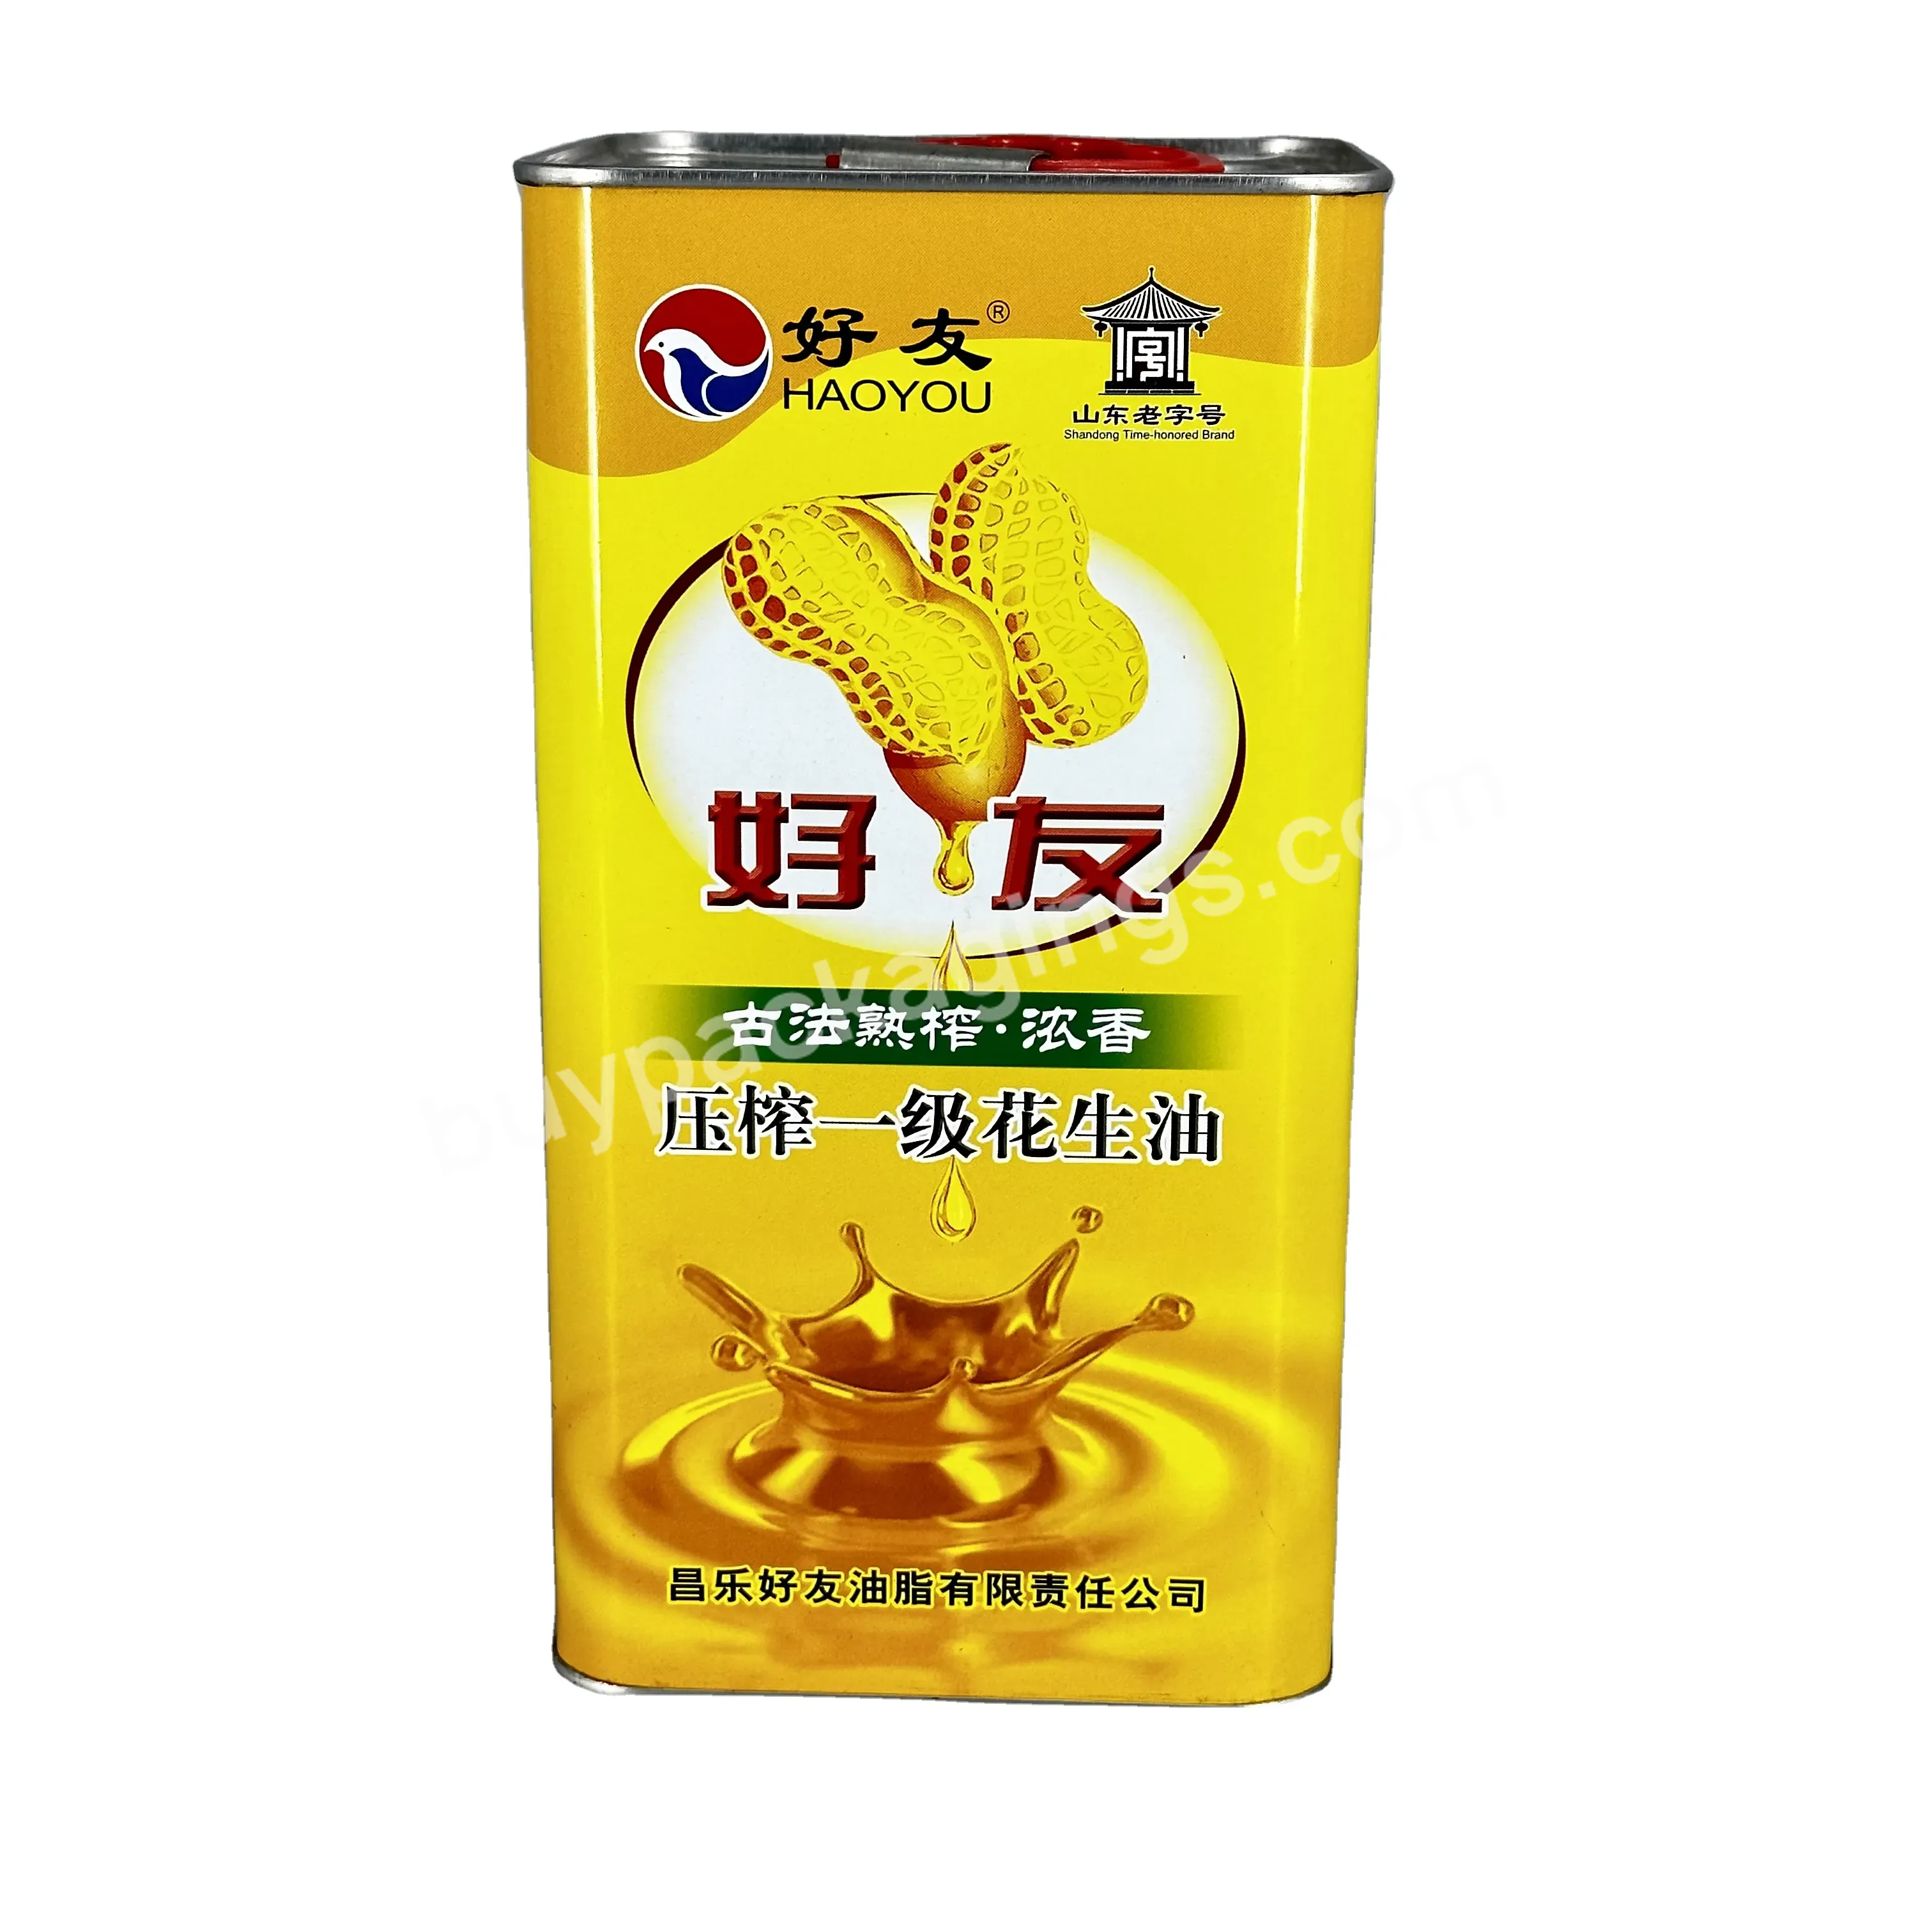 2023 Newest 2.5l Square Cooking Oil/olive Oil Tin Can Tin Cans For Food Canning With Plastic Handle And Spout Lid - Buy Tin Cans For Food Canning,2.5l Square Cooking Oil/olive Oil Tin Can,With Plastic Handle And Spout Lid.